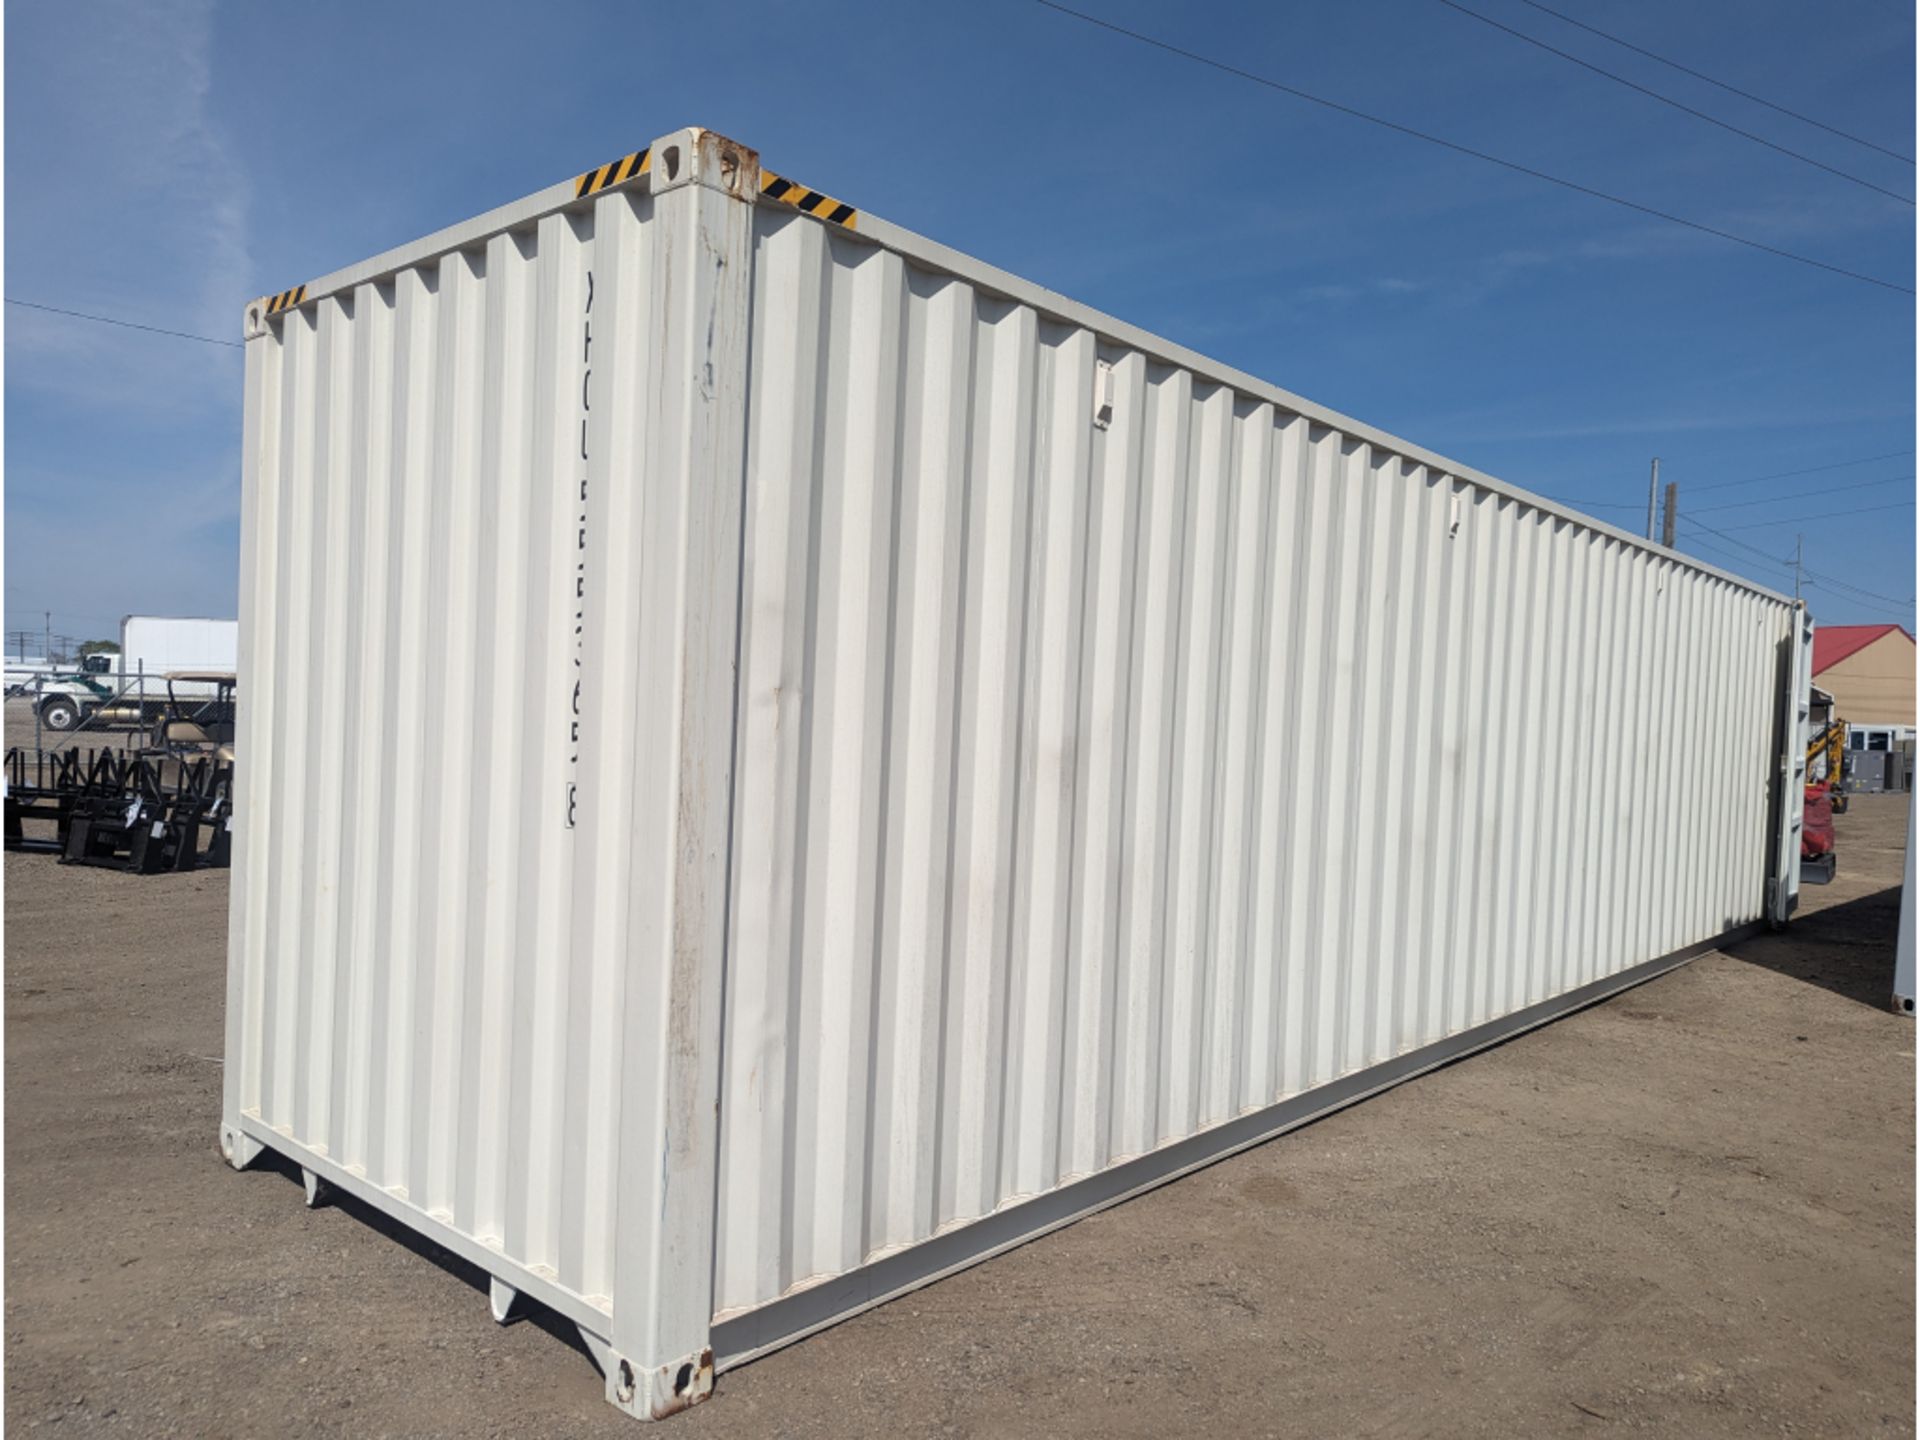 1 Trip 40' High Side Shipping Container w/ Side Doors - Image 2 of 4